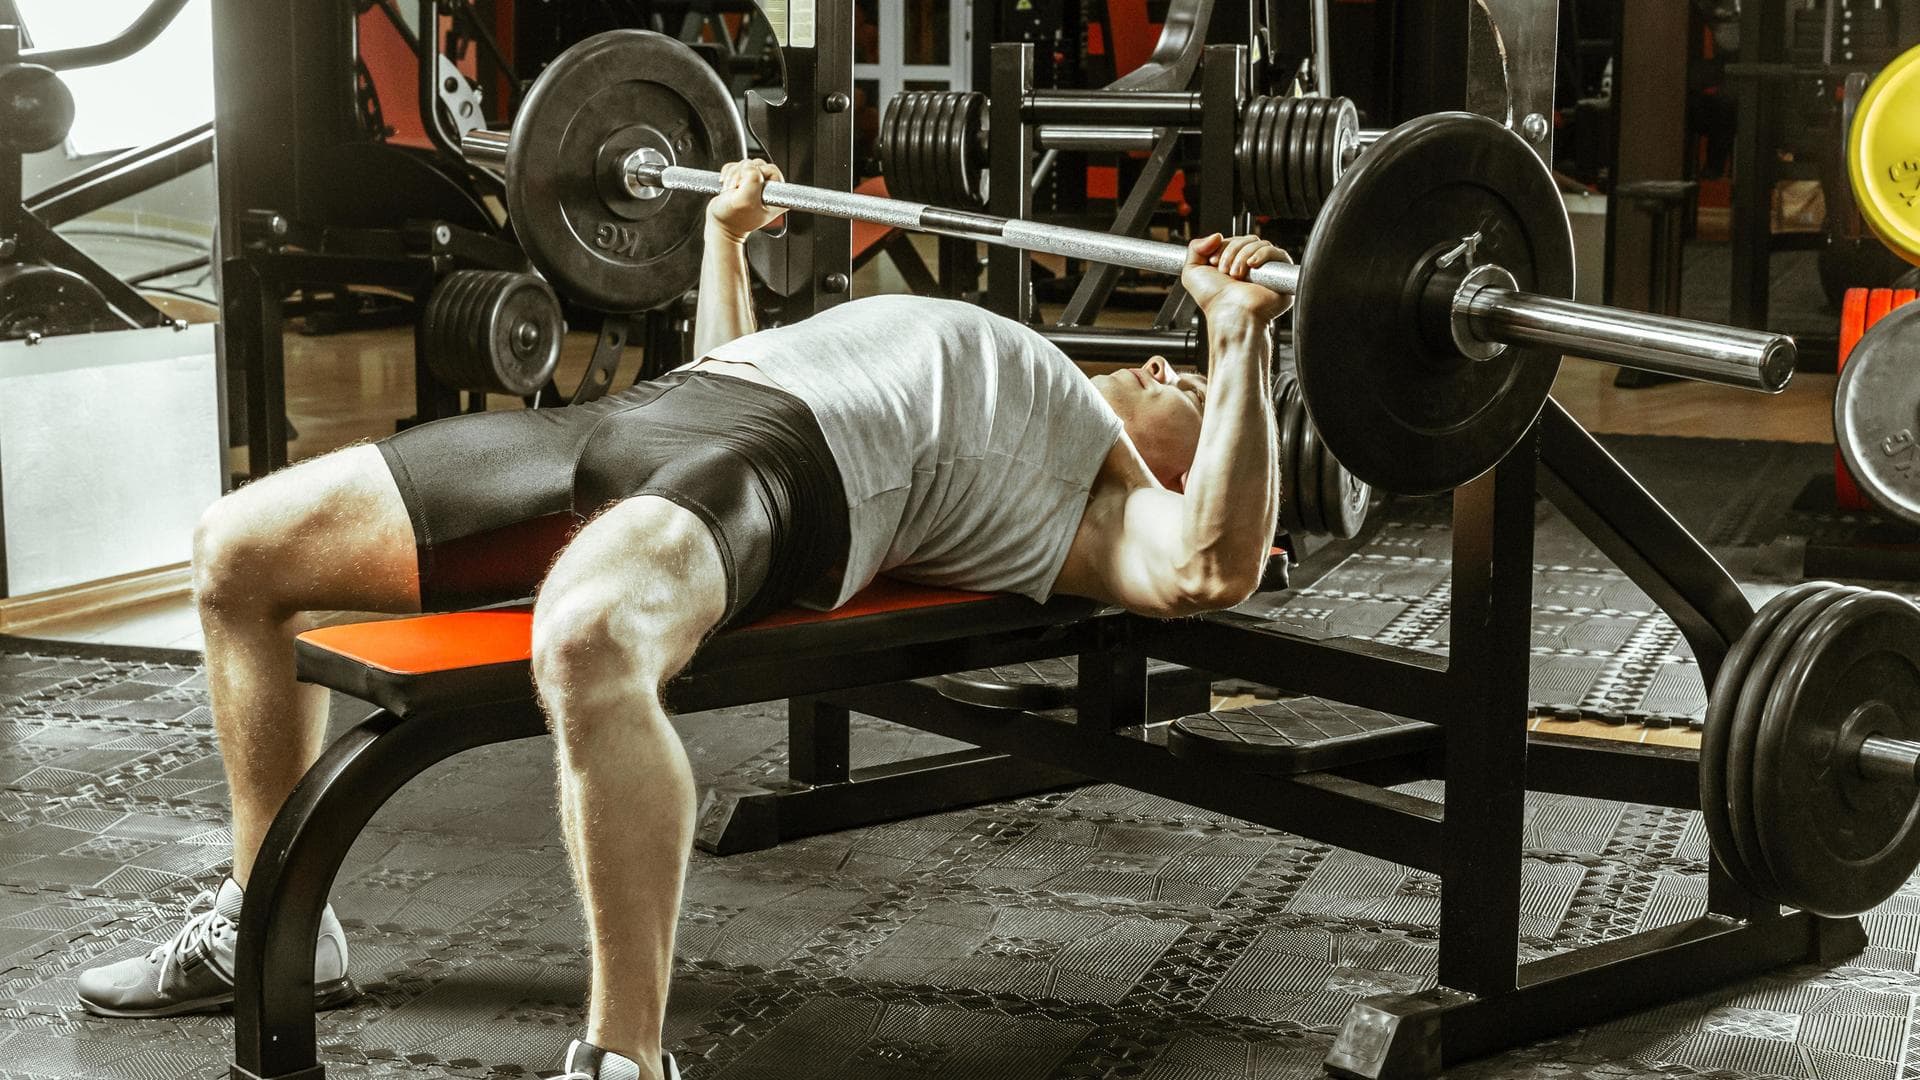 Supercharge your chest muscles with these bench press variations